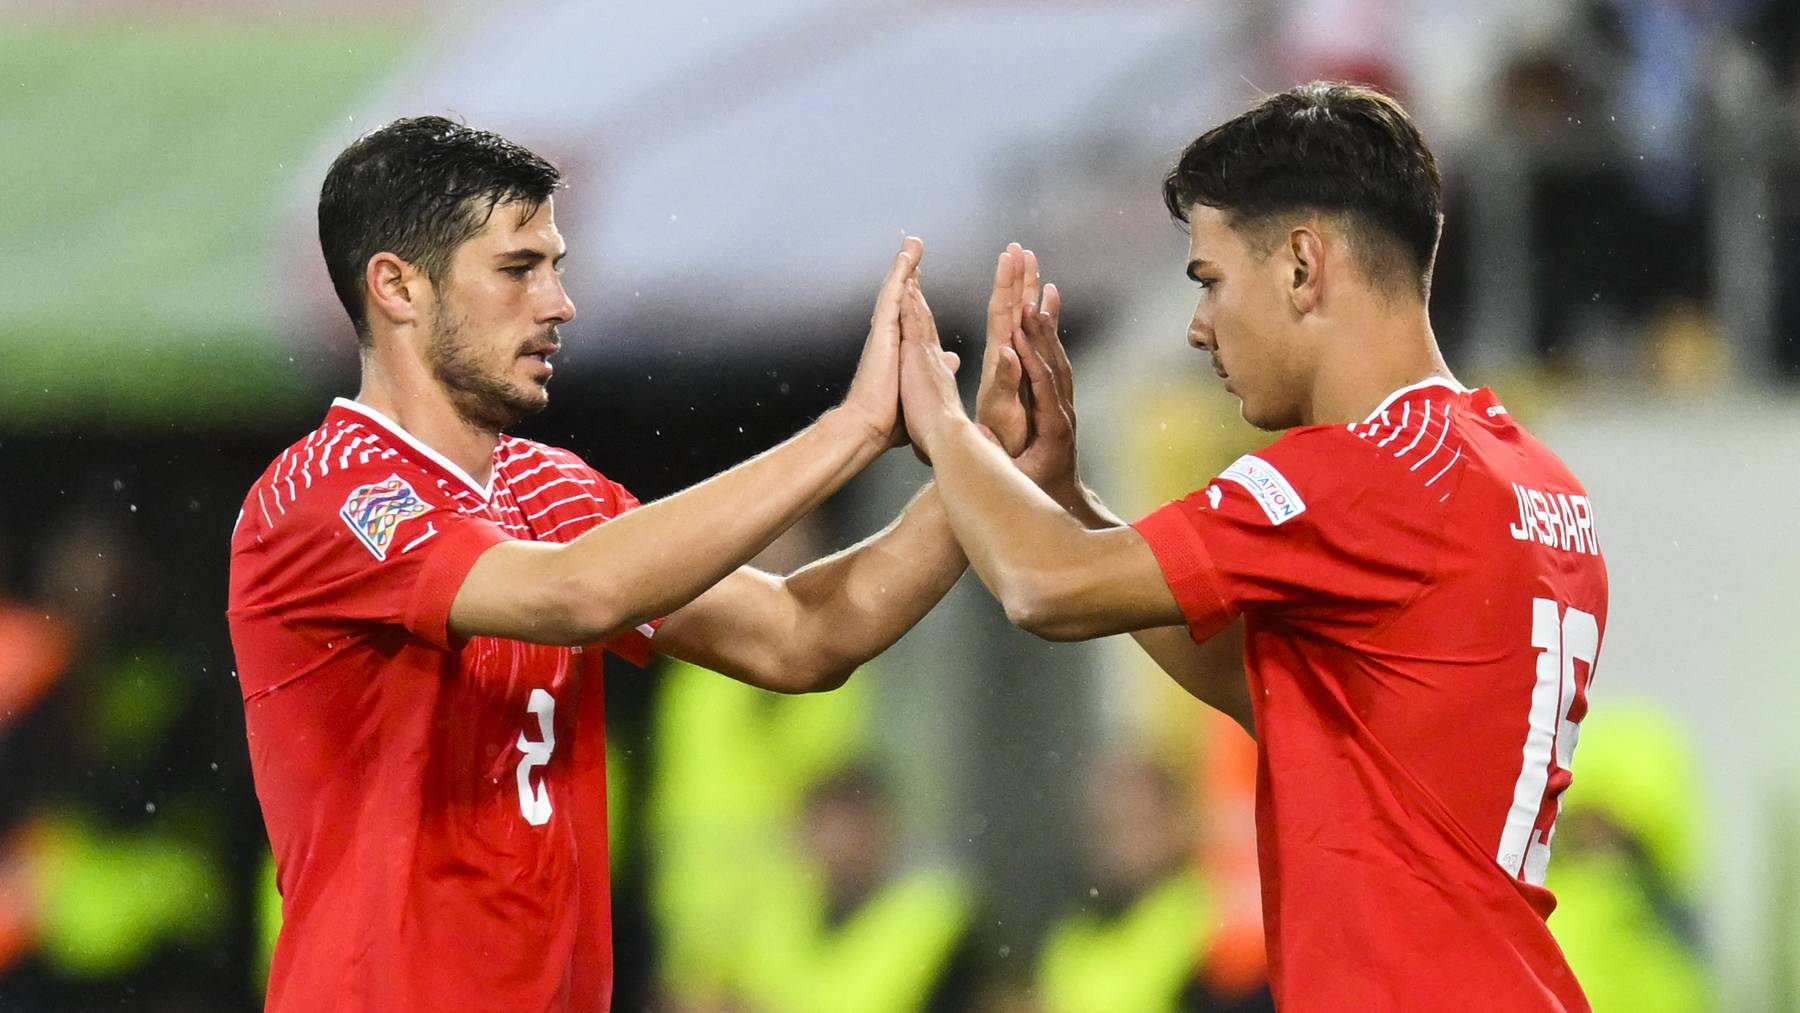 Switzerland's midfielder Remo Freuler, left, and substitute player Ardon Jashari during the UEFA Nations League group A2 soccer match between Switzerland and Czech Republic, on Tuesday, September 27, 2022, at the Kybunpark stadium, in St. Gallen, Switzerland.